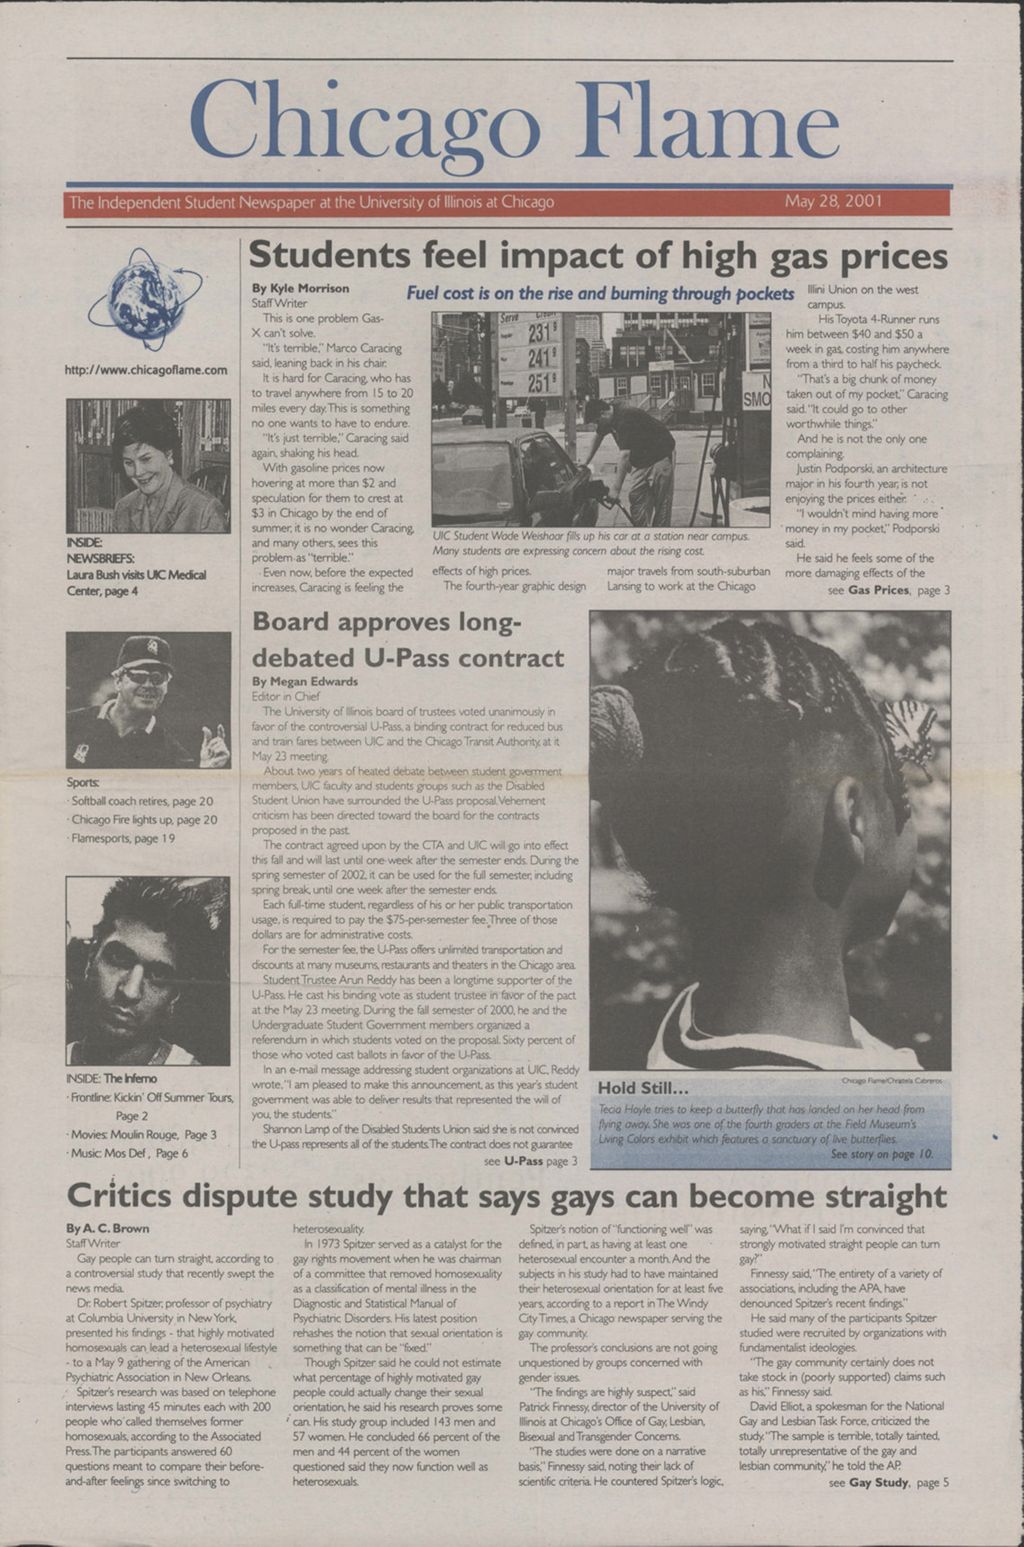 Chicago Flame (May 28, 2001)